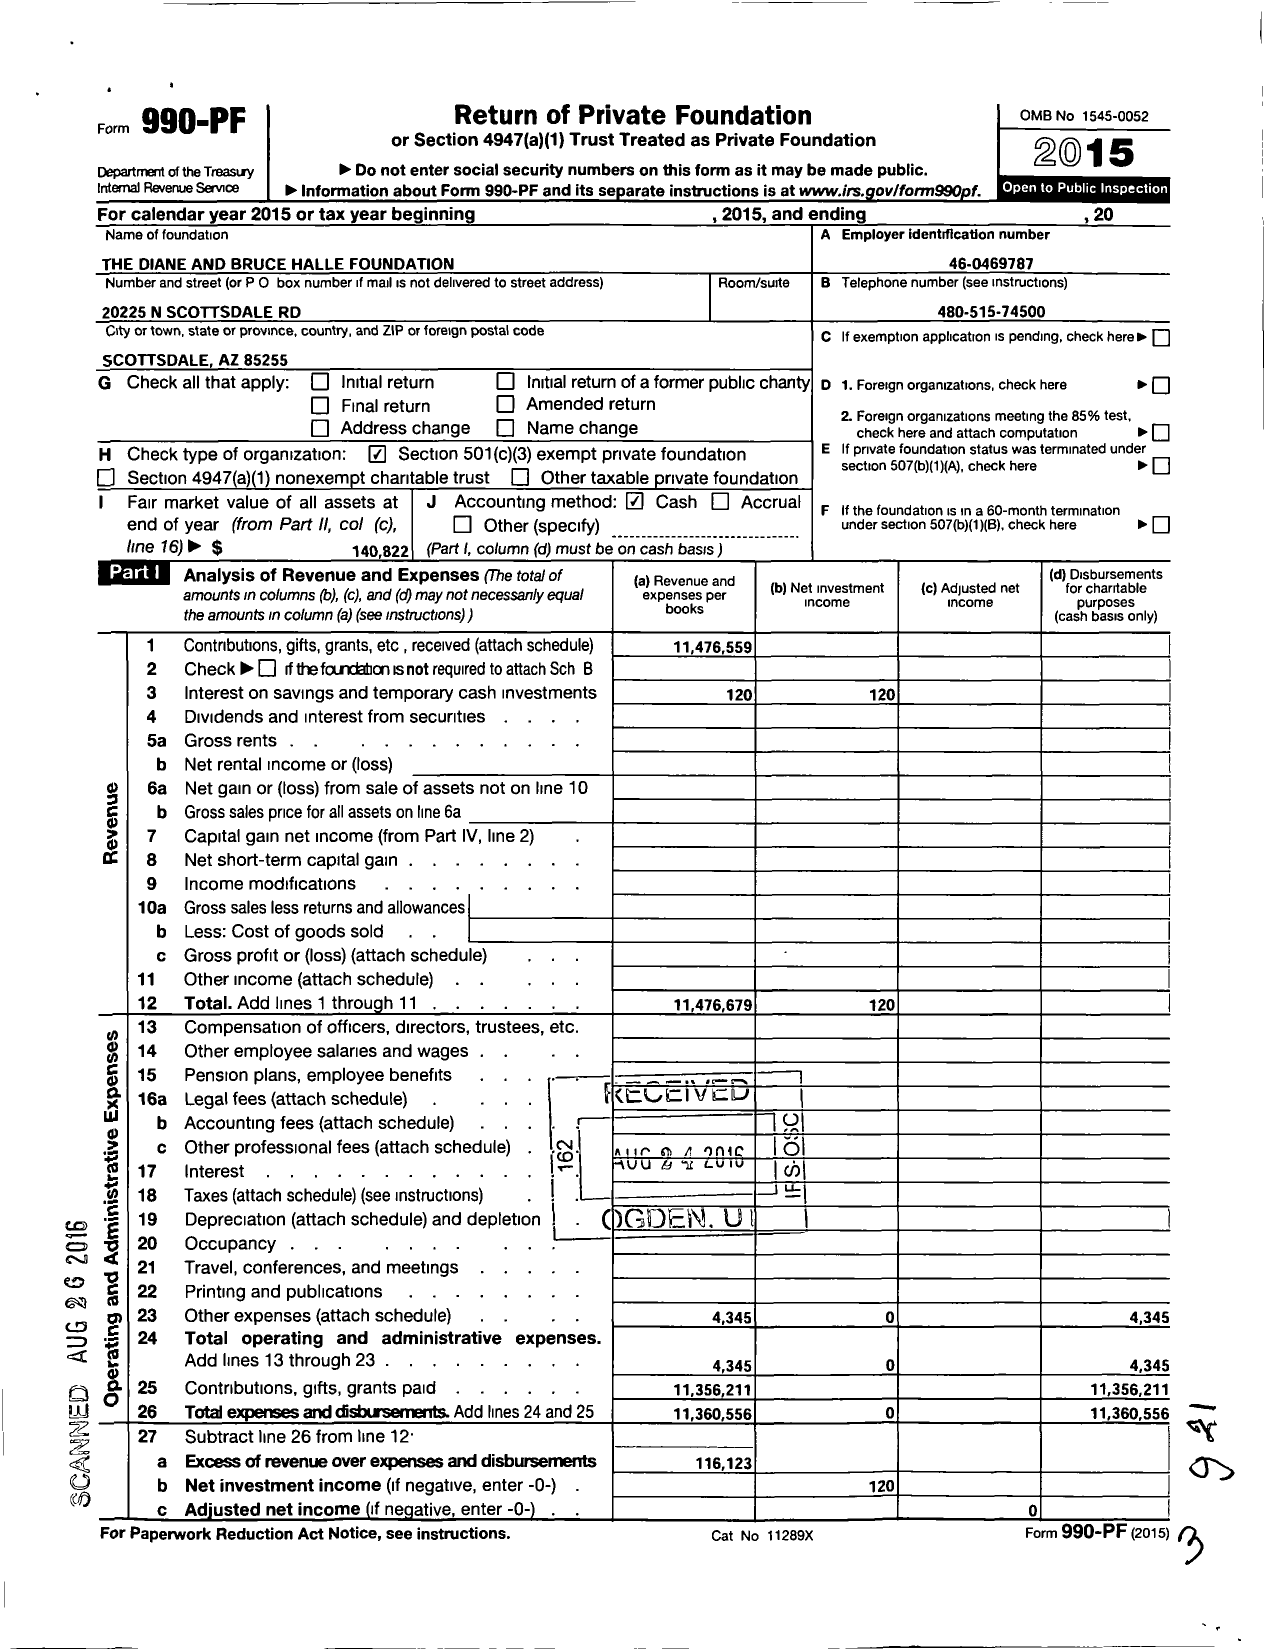 Image of first page of 2015 Form 990PF for Diane and Bruce Halle Foundation